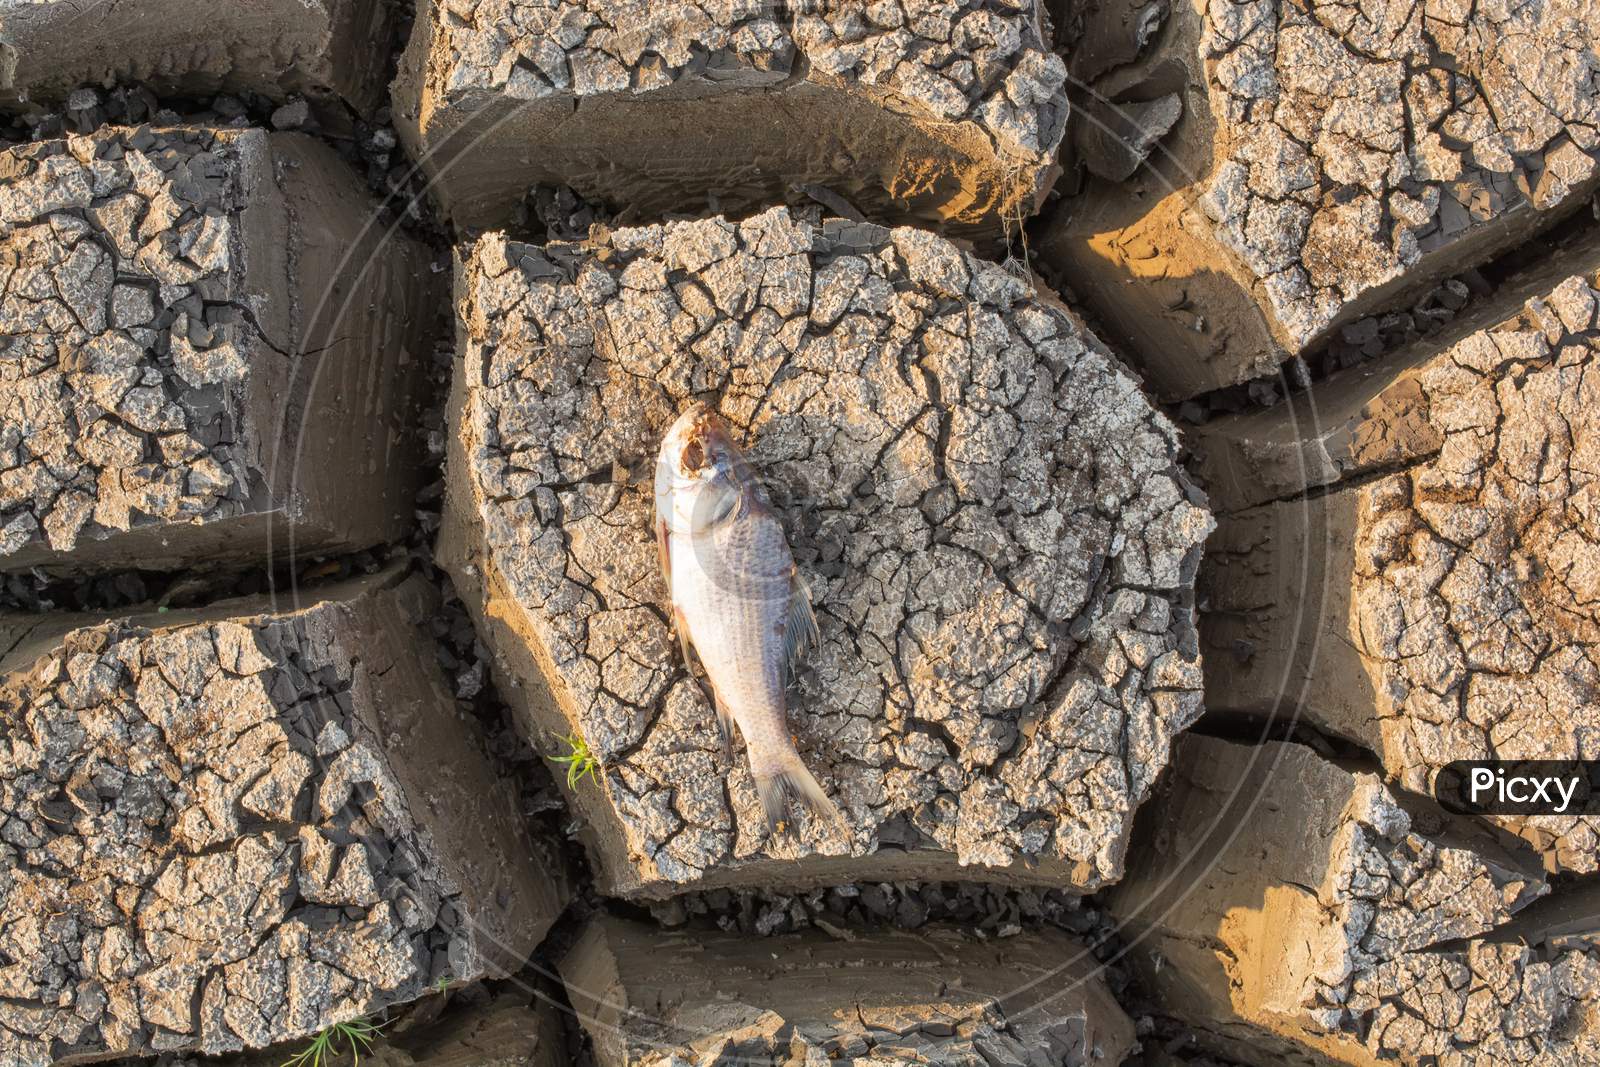 Died Fish In A Dried Up Empty Reservoir Or Dam Due To A Summer Heatwave, Low Rainfall, Pollution And Drought In North Karnataka,India